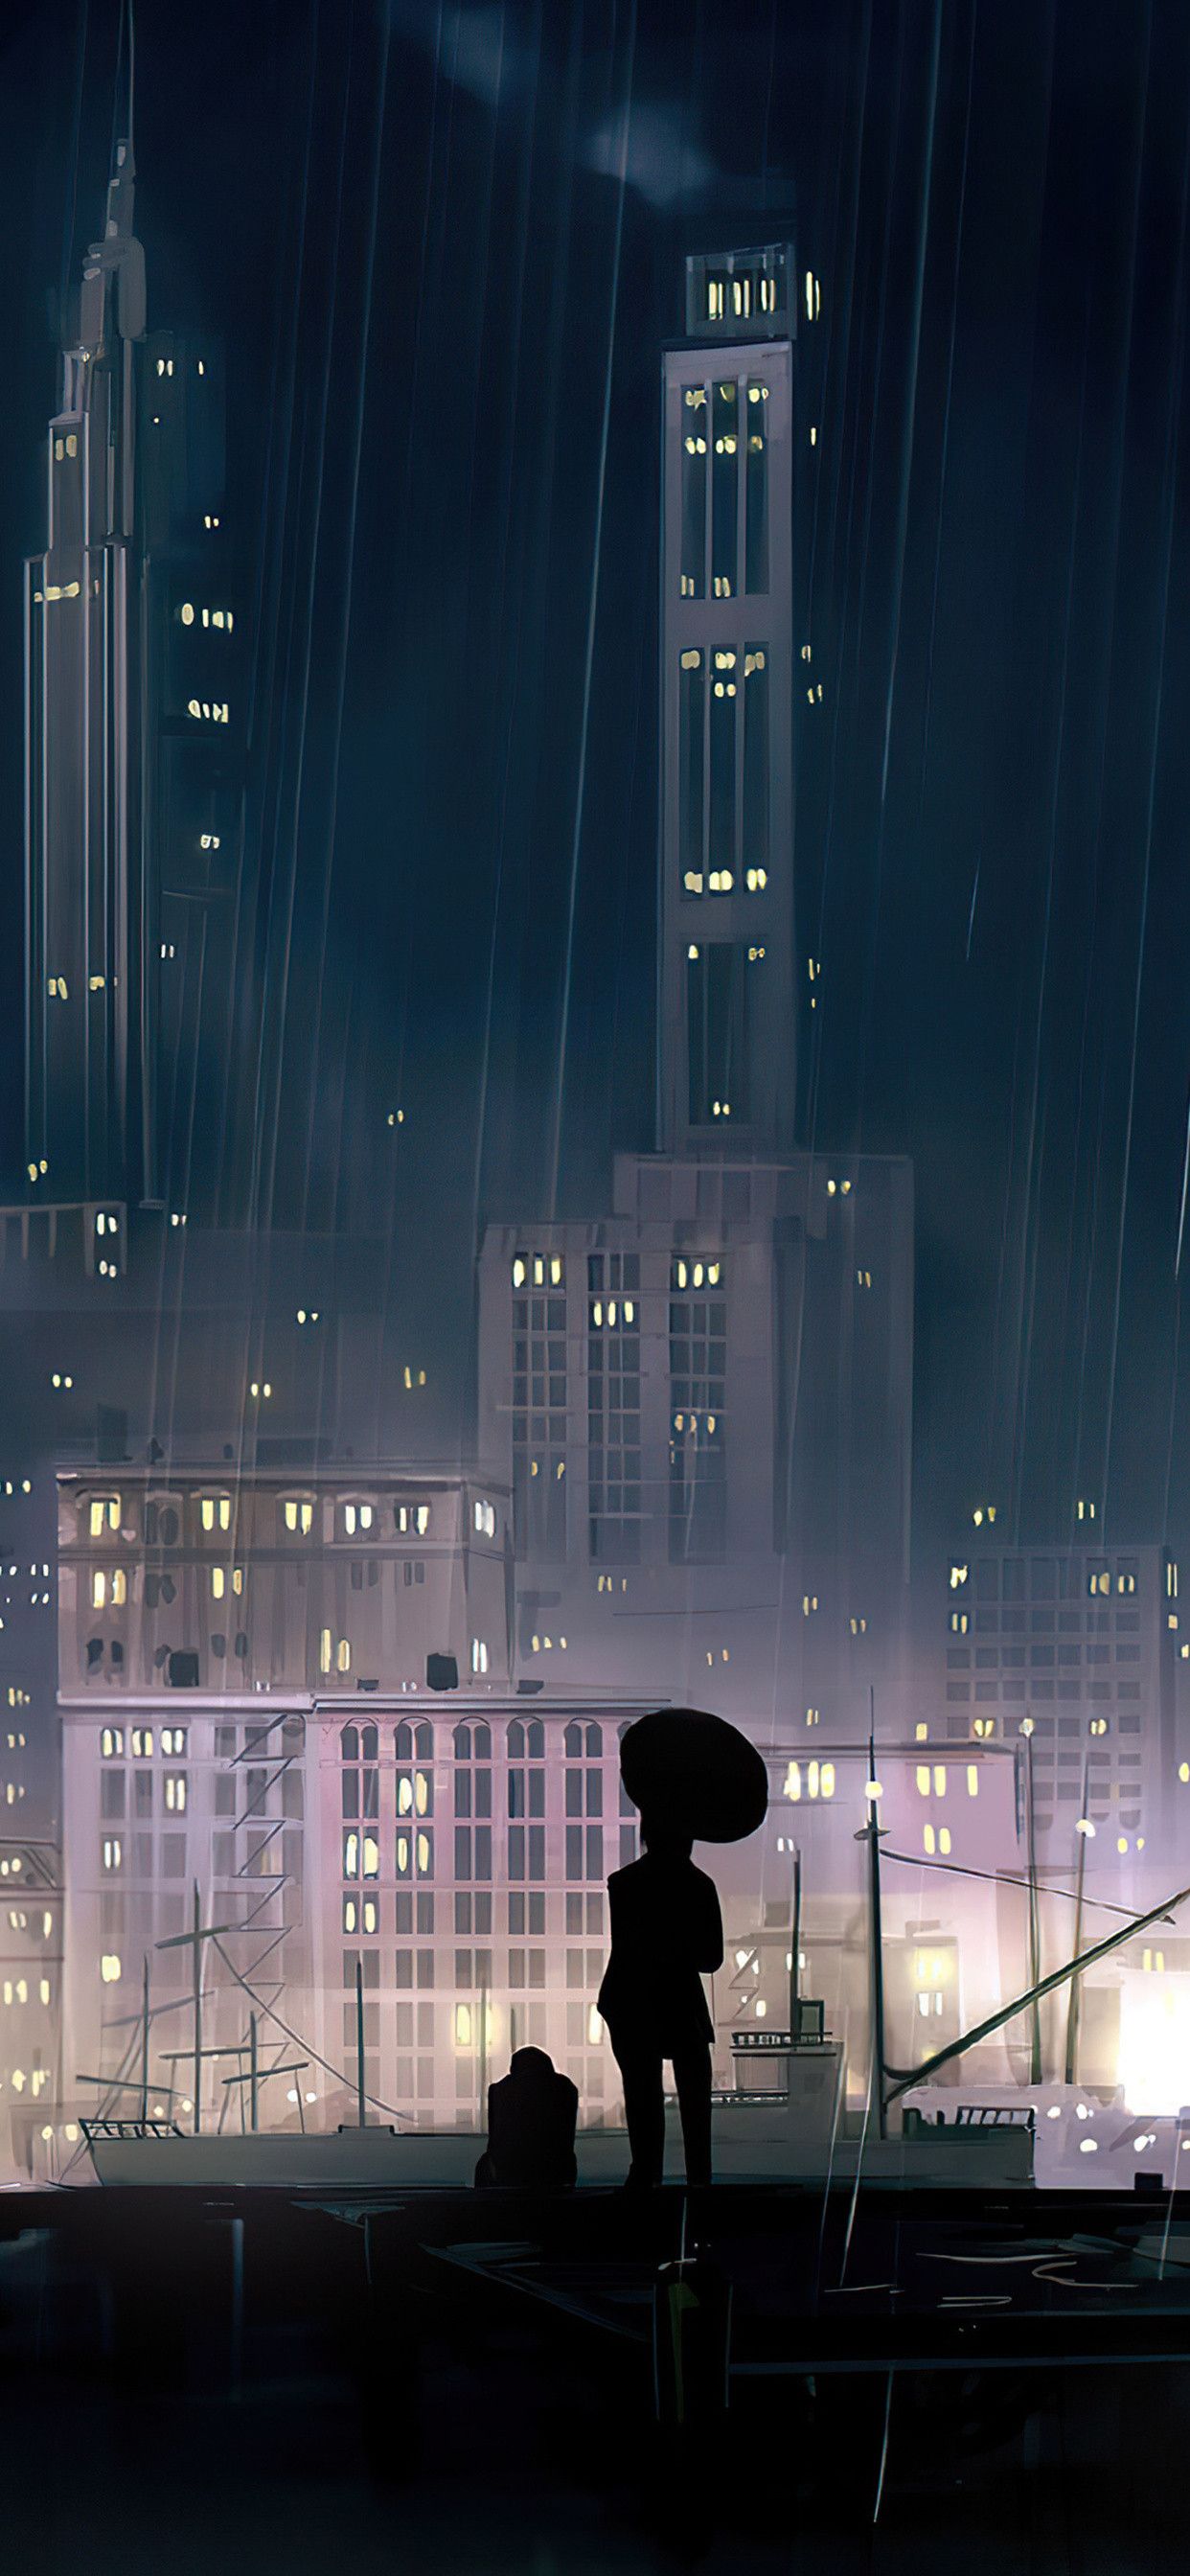 A person standing in the rain at night - Anime city, night